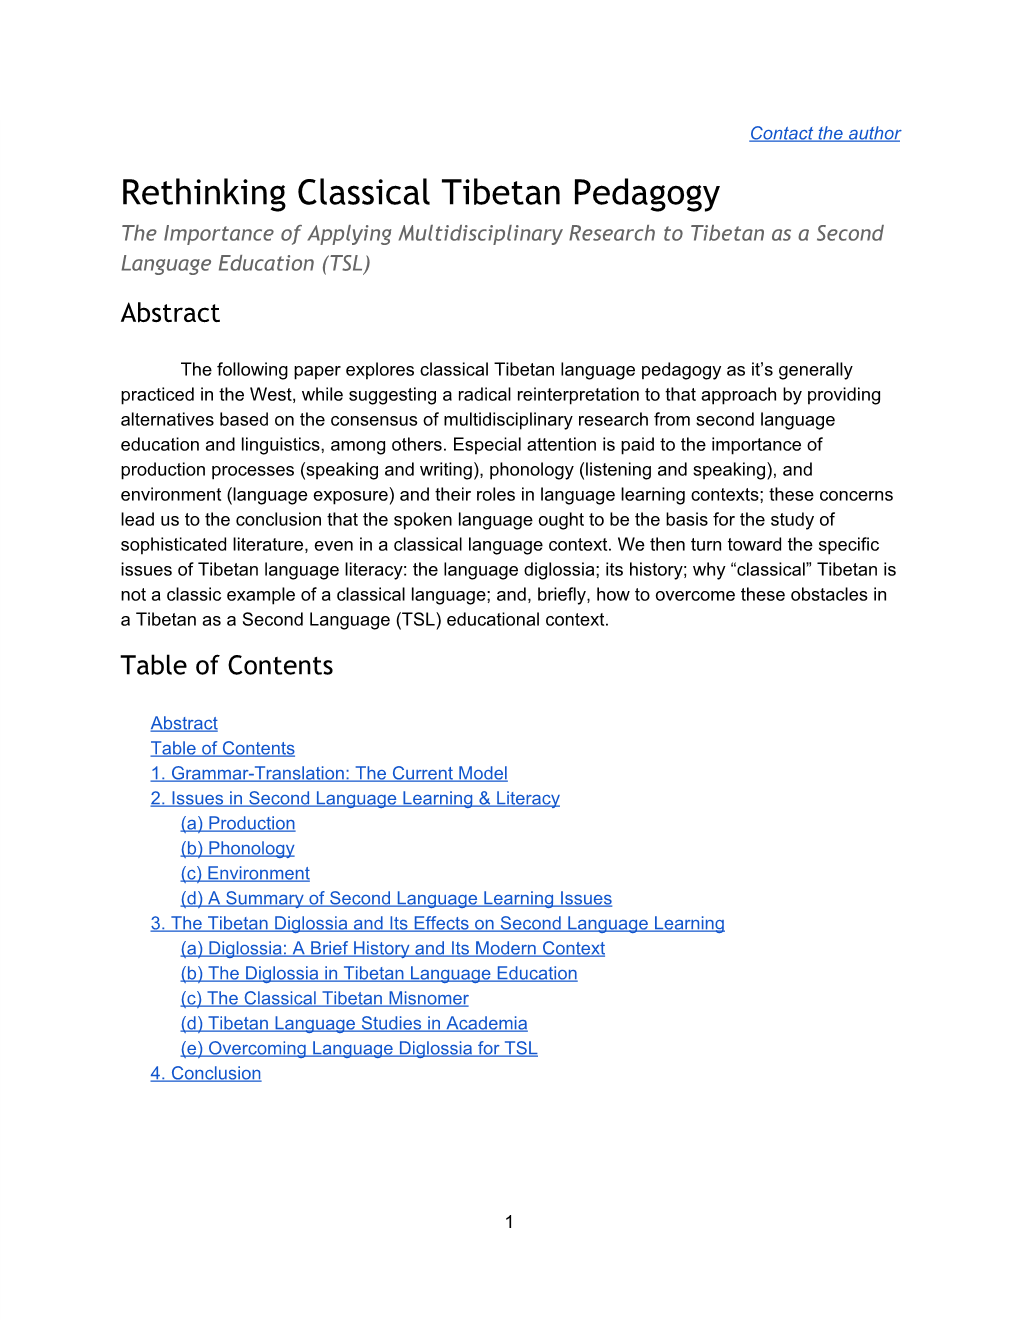 Rethinking Classical Tibetan Pedagogy the Importance of Applying Multidisciplinary Research to Tibetan As a Second Language Education (TSL) Abstract